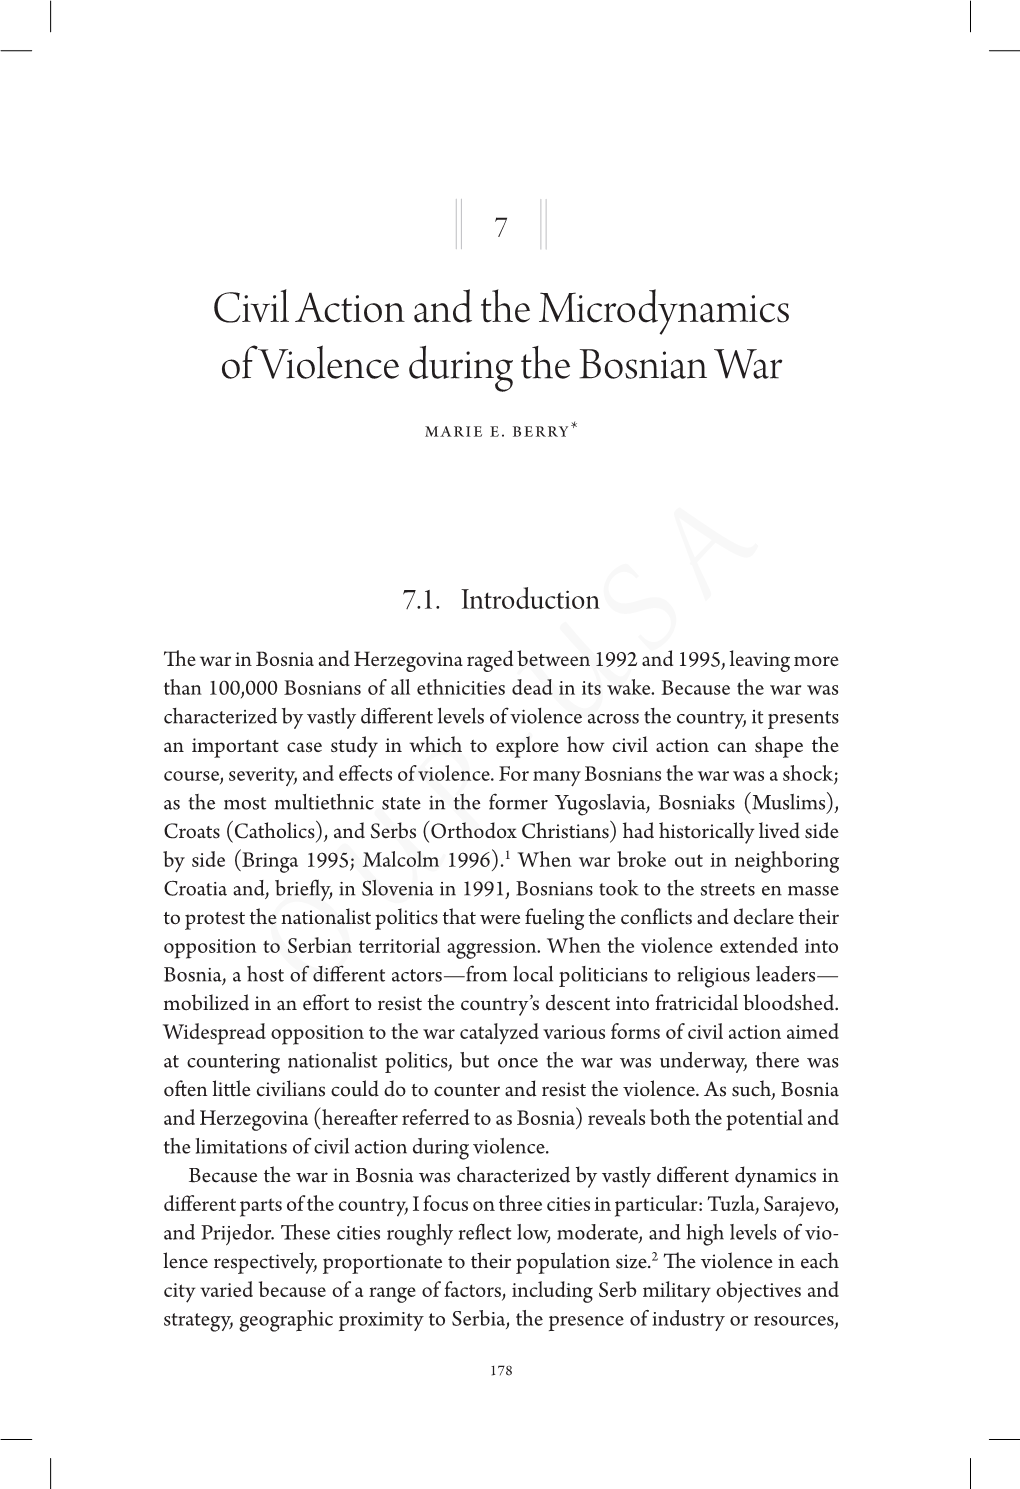 Civil Action and the Microdynamics of Violence During the Bosnian War